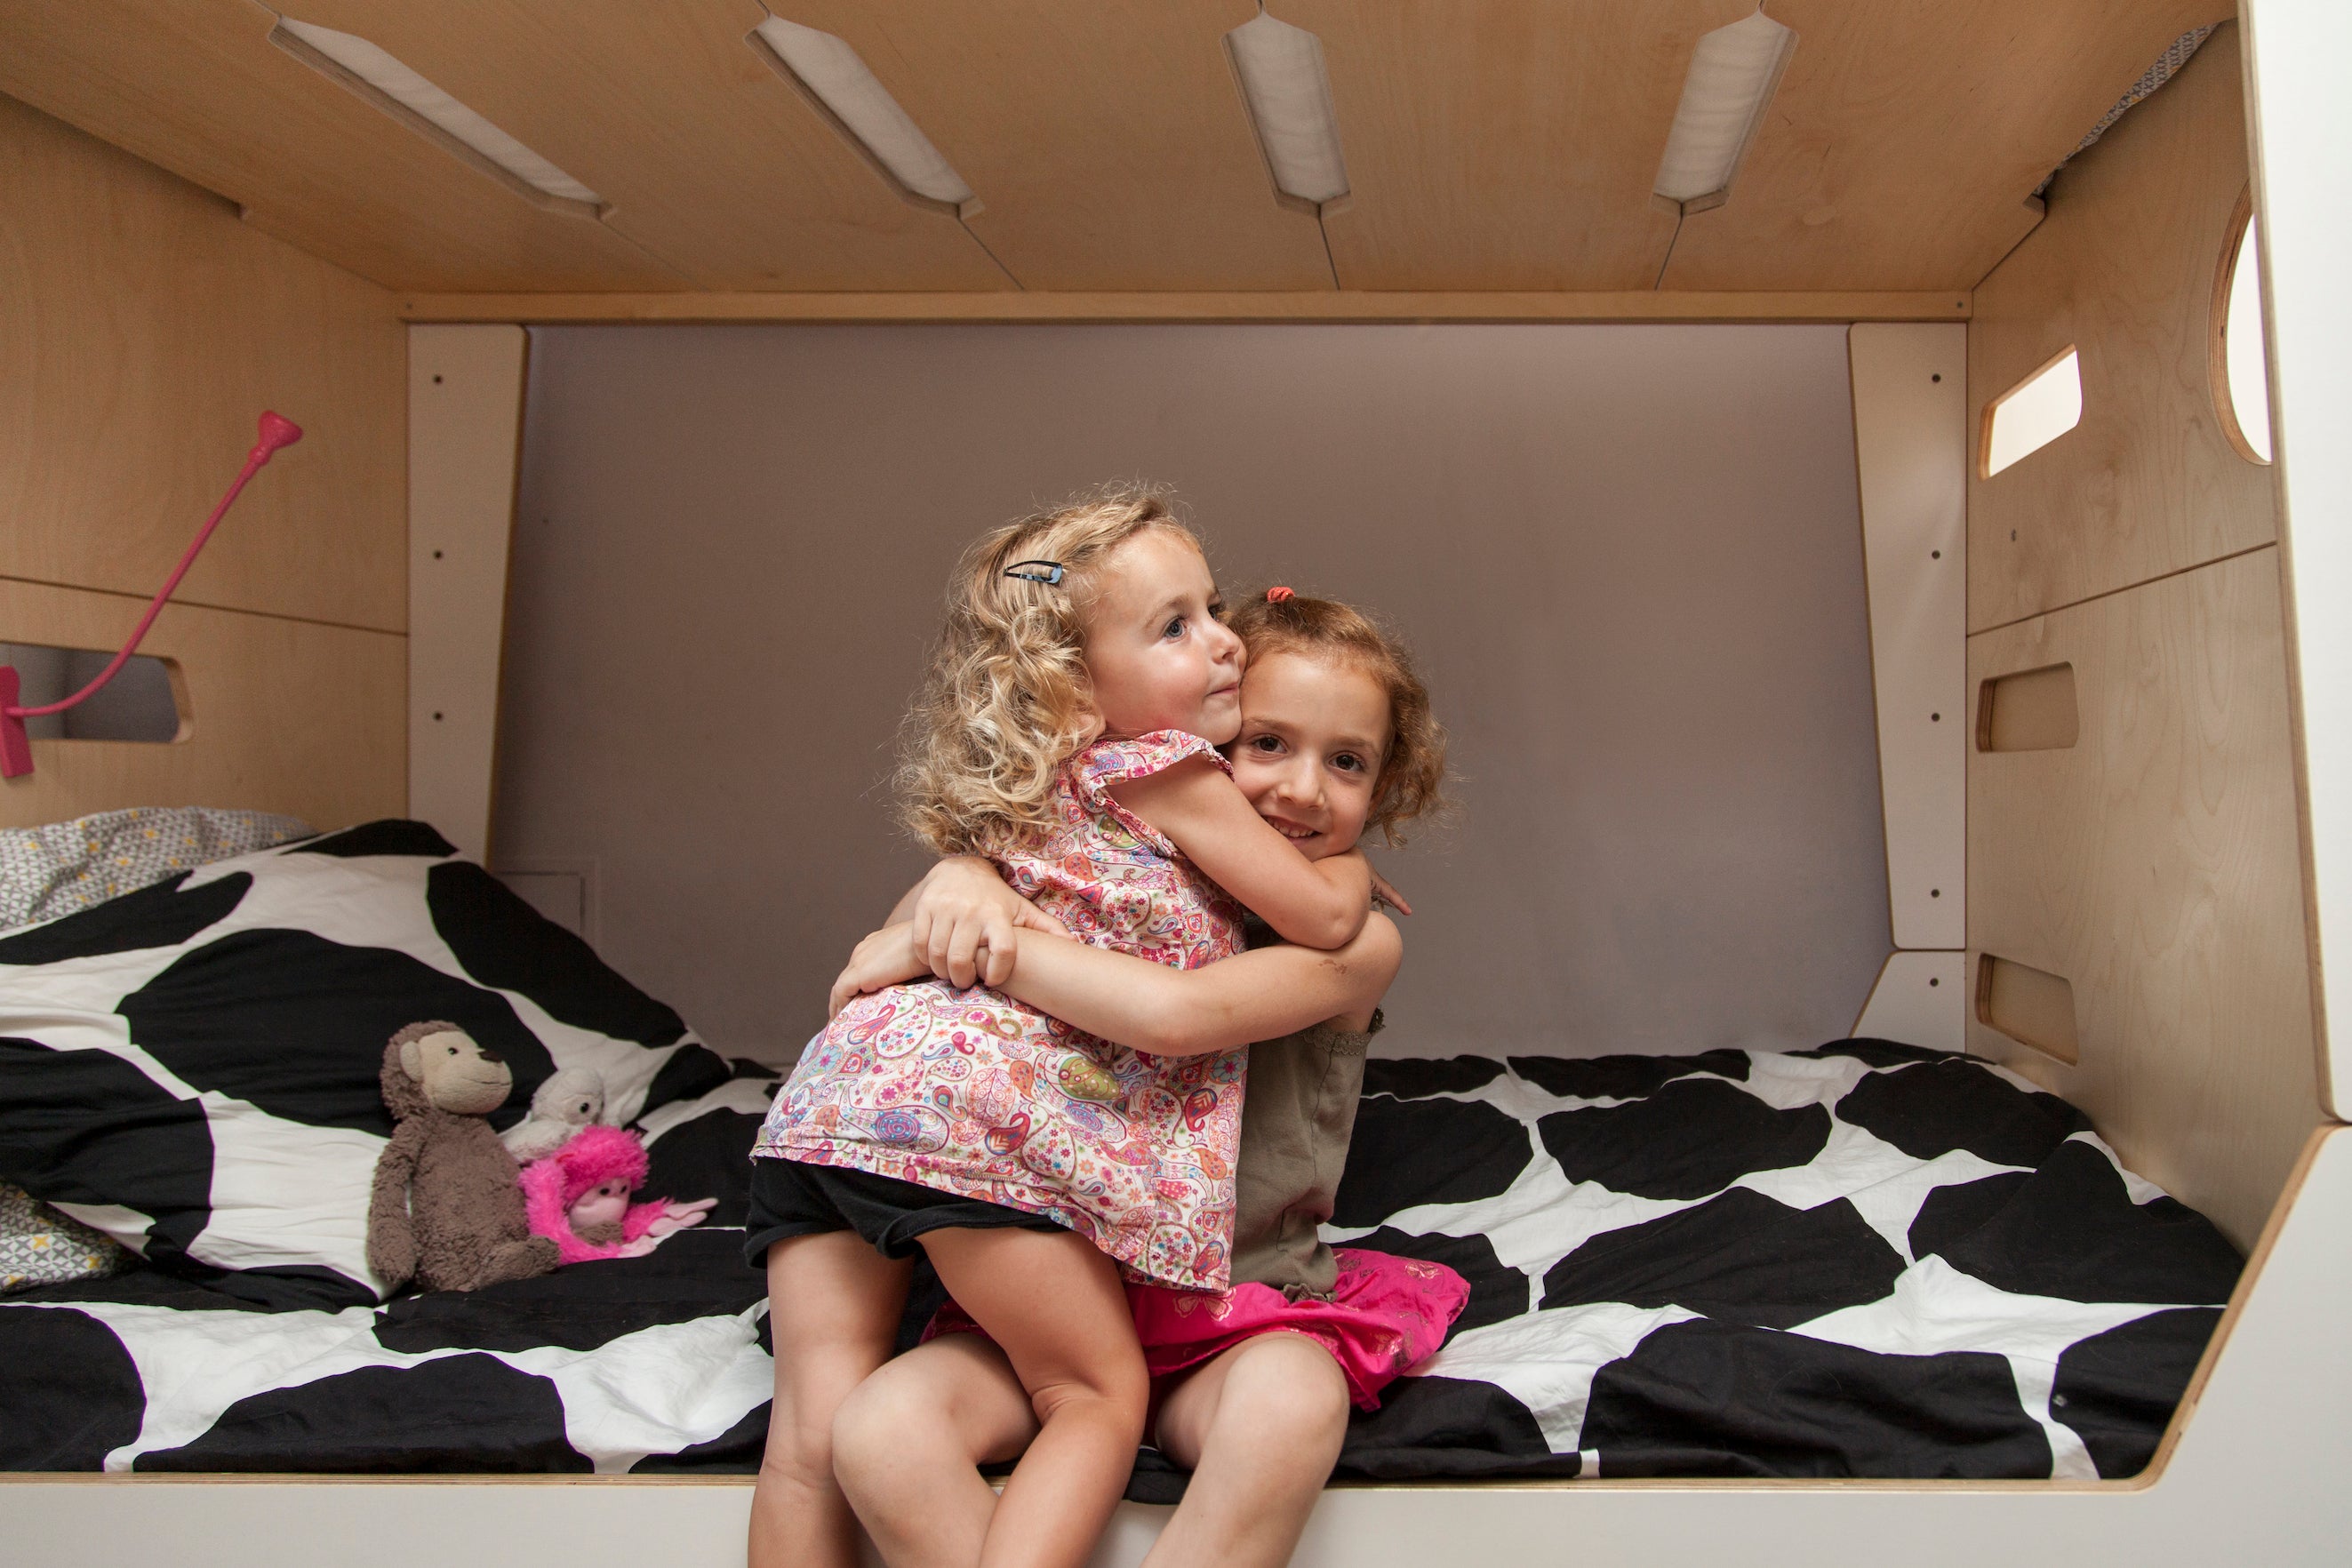 Two young girls hugging on a bed inside a cozy, wooden cabin-like space, with toys around them.